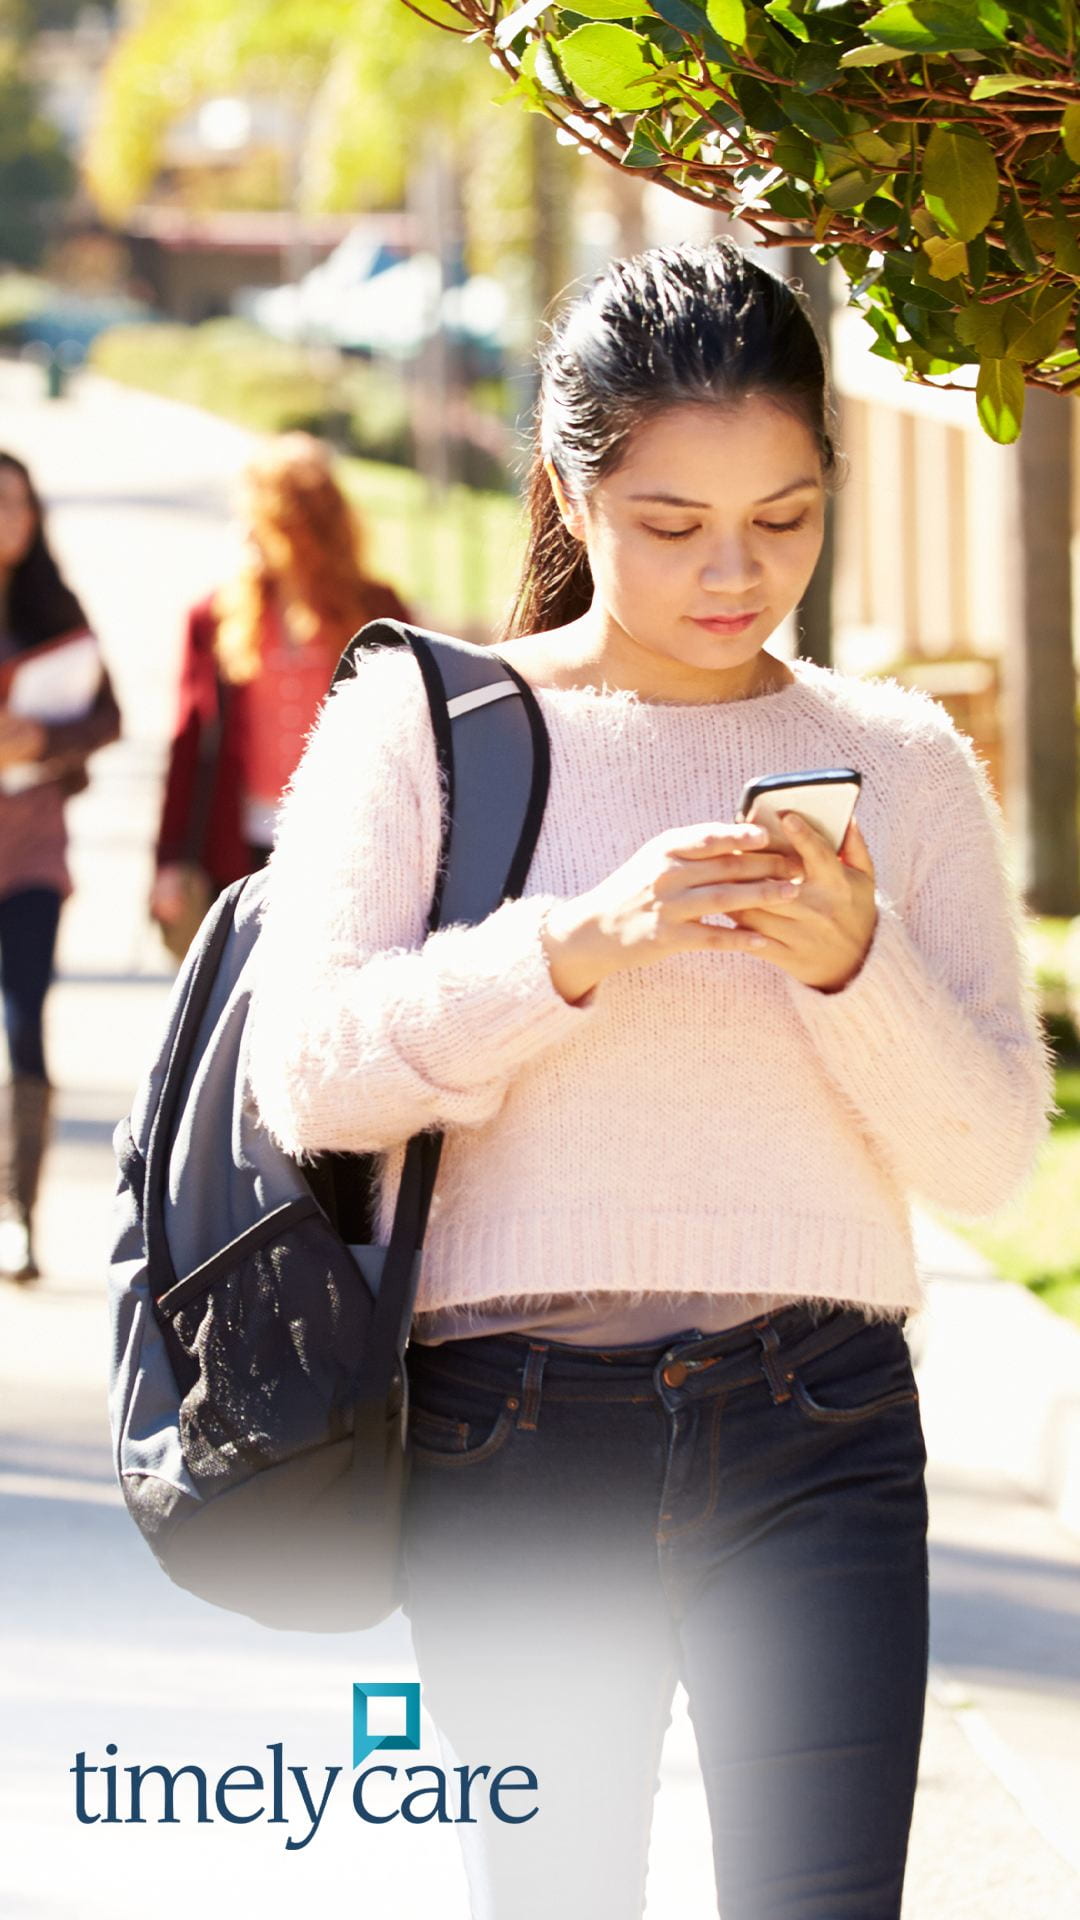 Female student walking and looking at phone